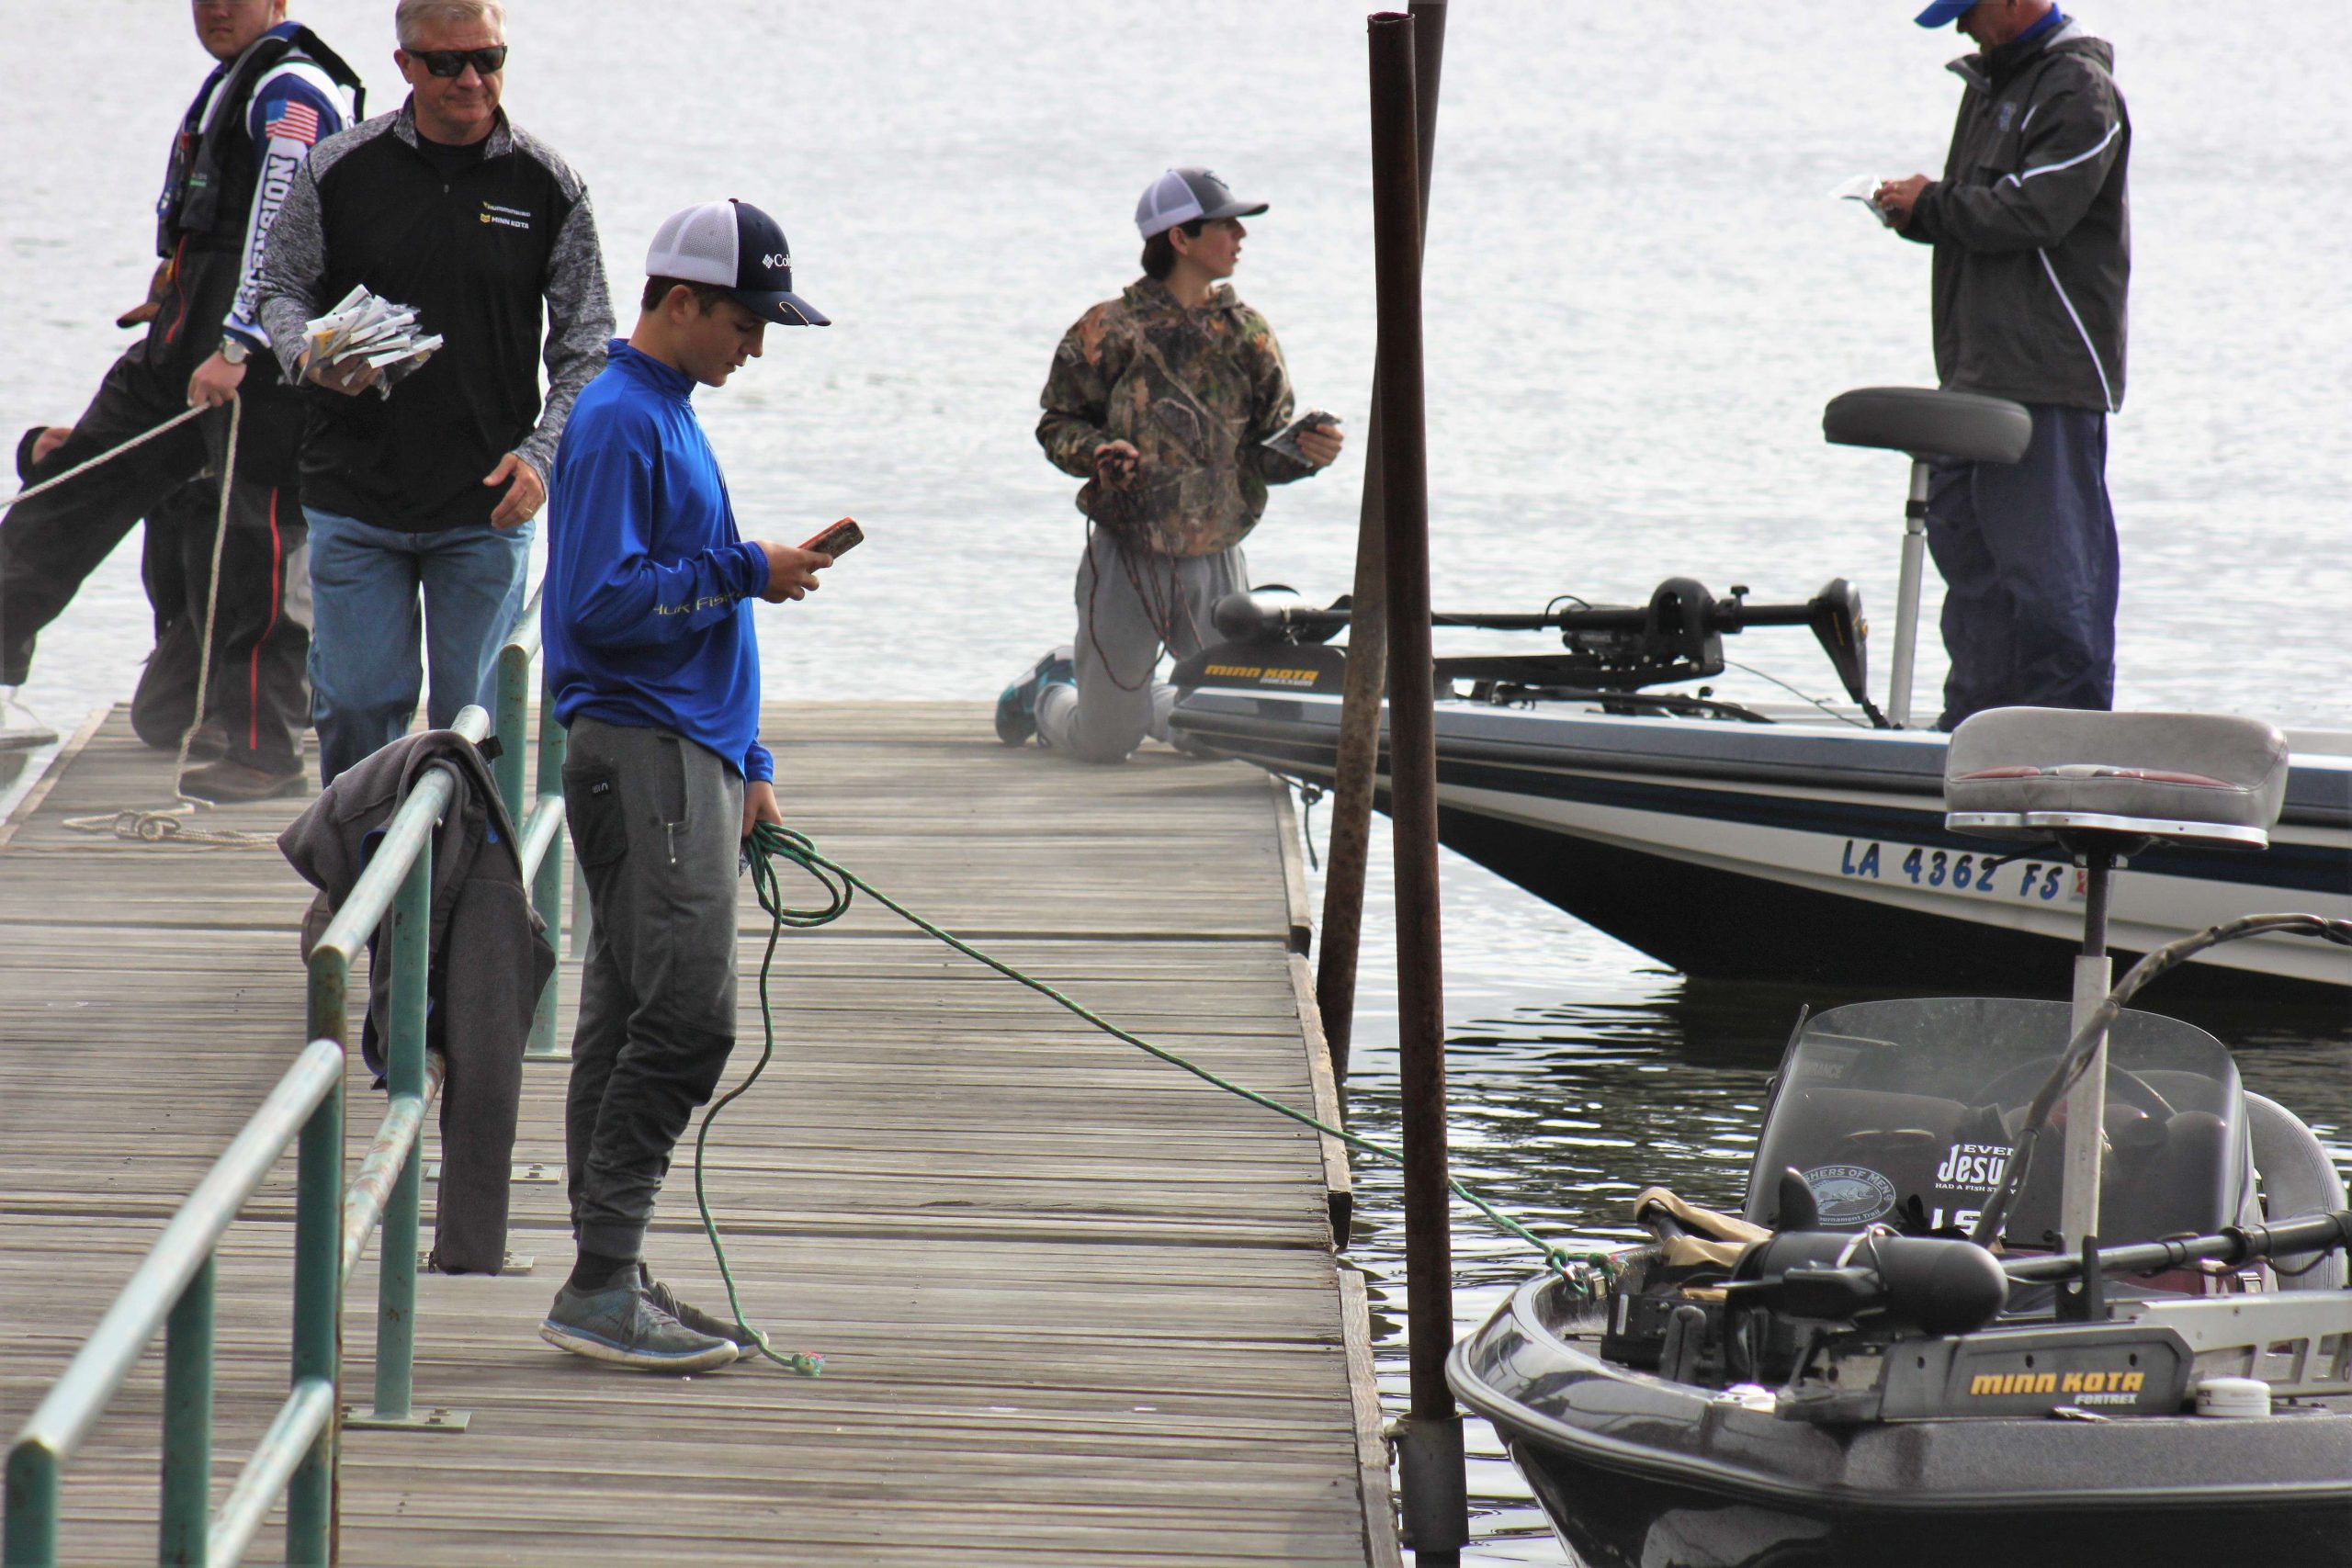 This angler scans his phone will keeping his ride close to the dock.